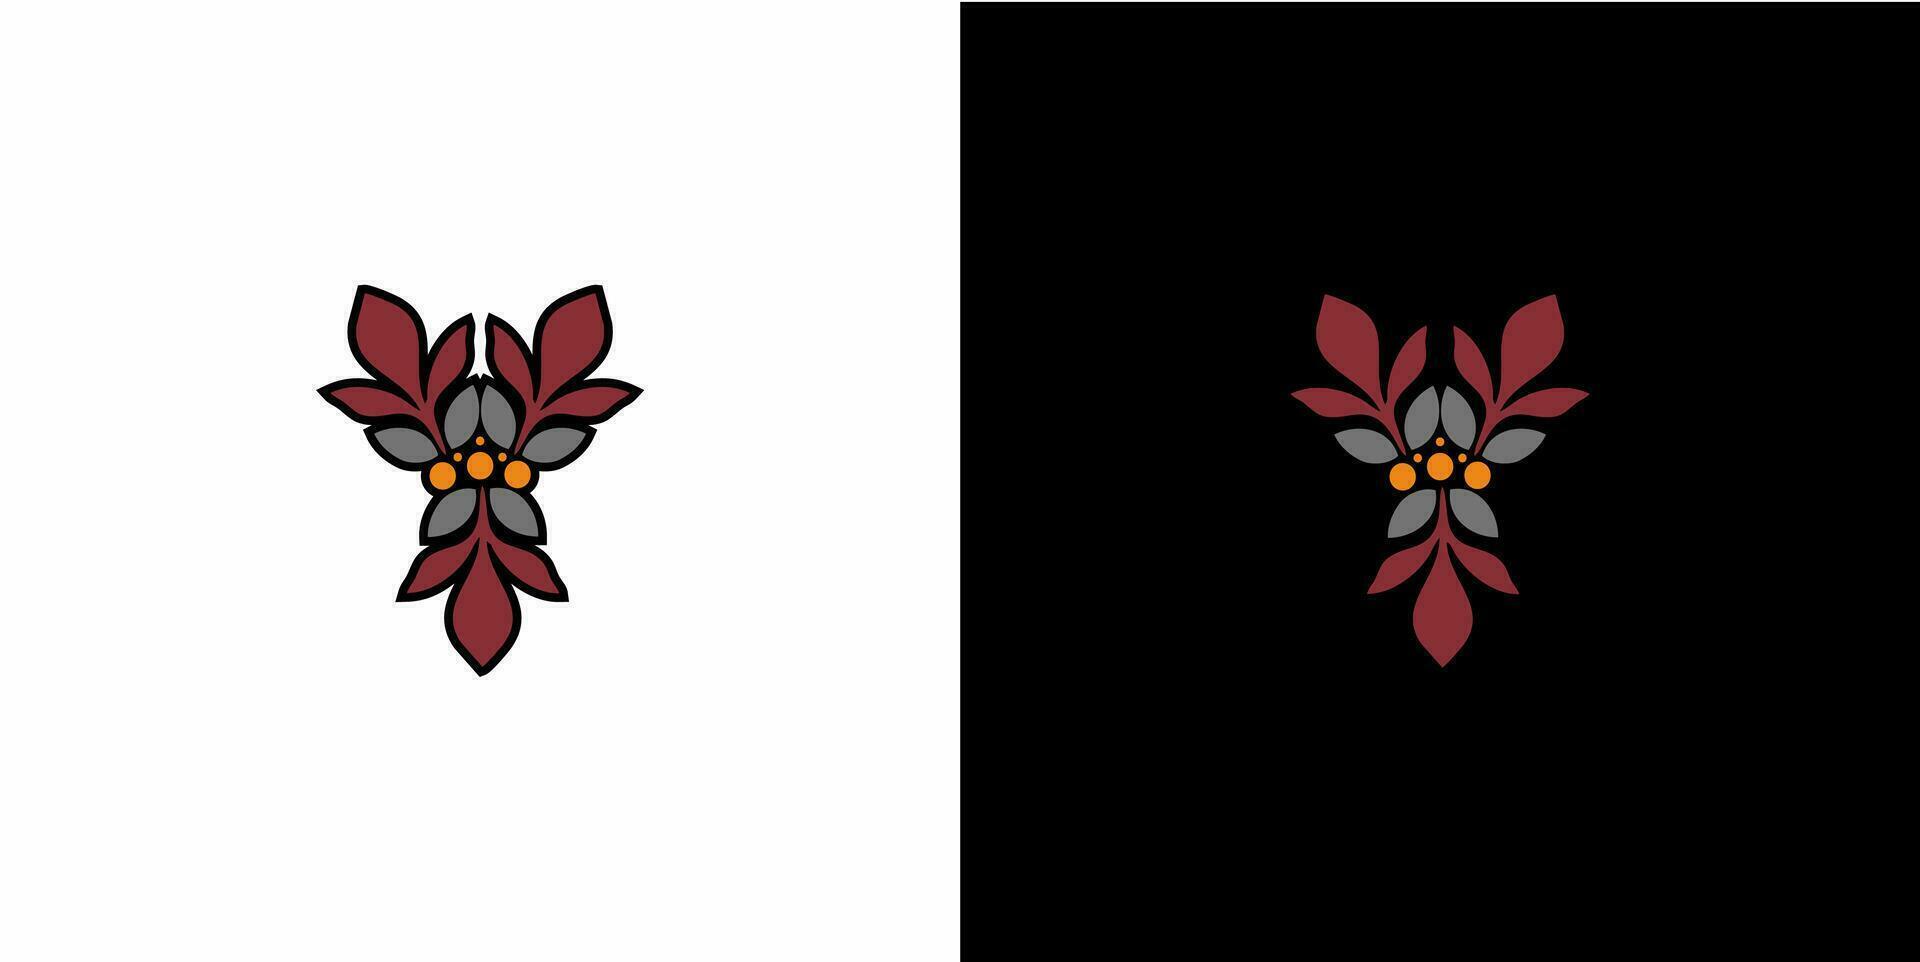 two different designs of flowers on black and white vector